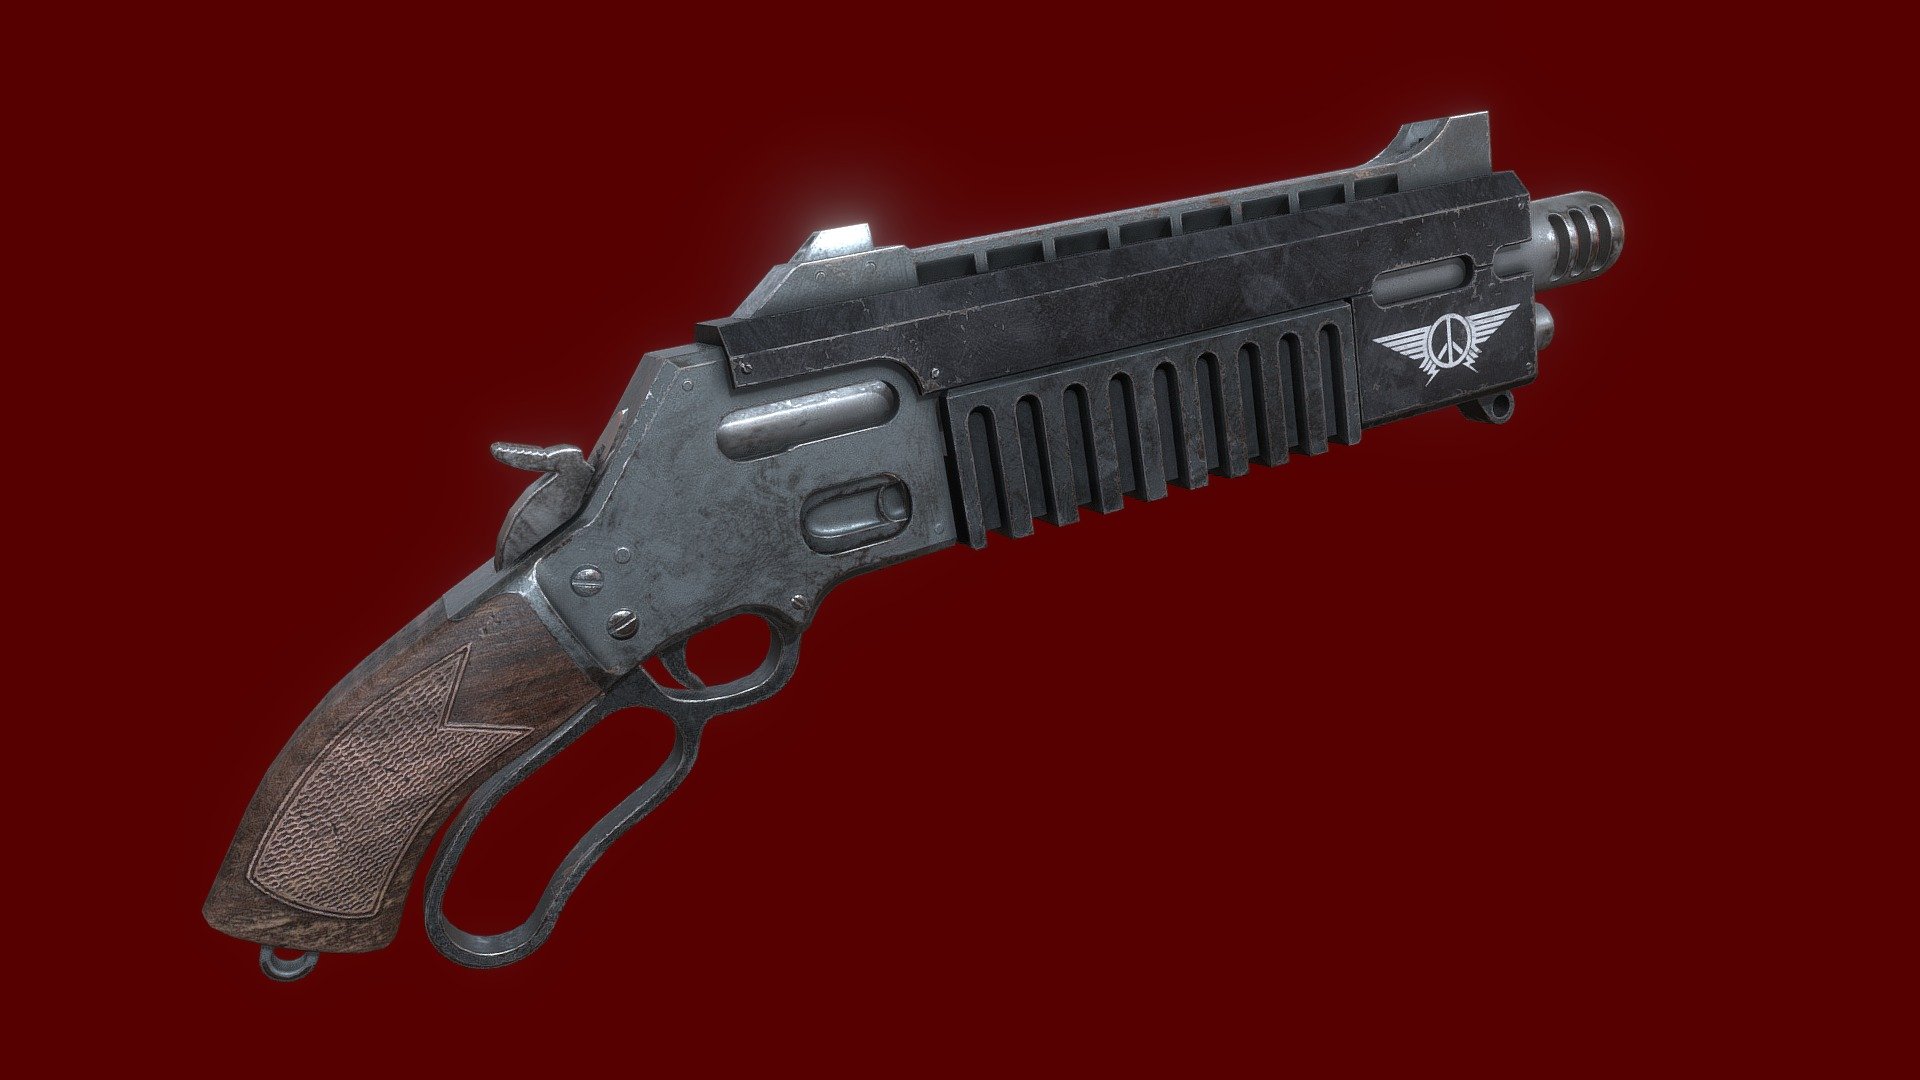 Not a fan of Warhammer 40K myself, and not my proudest model, but it sure looks great with those textures by @WilliamPG

Commissioned for a H3VR mod by Rustycontroller in the Homebrew discord, Original art by Graffiti Soul on Twitter.

Also pretty sure this is the low poly version of it idk - Lever Action Bolter - 3D model by Wolfosito (@wtksmb) 3d model